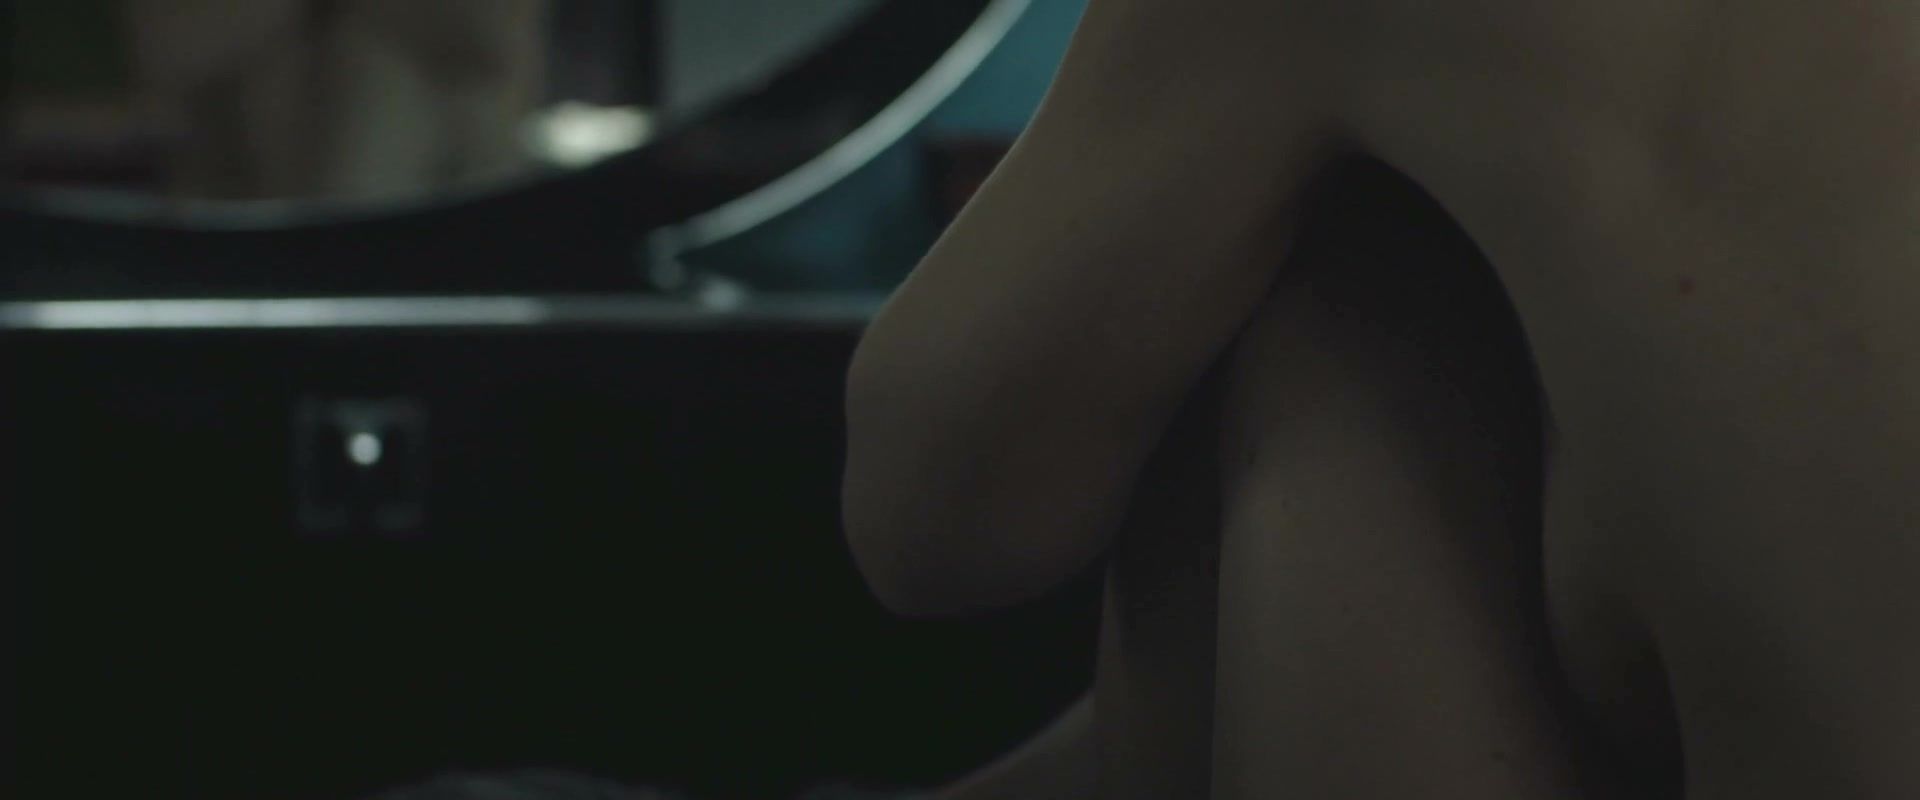 Pale Naked Deborah Ann Woll, Adelaide Clemens, Catherine Carlen, Vienna Stampeen nude - The Automatic Hate (2016) Butt Fuck